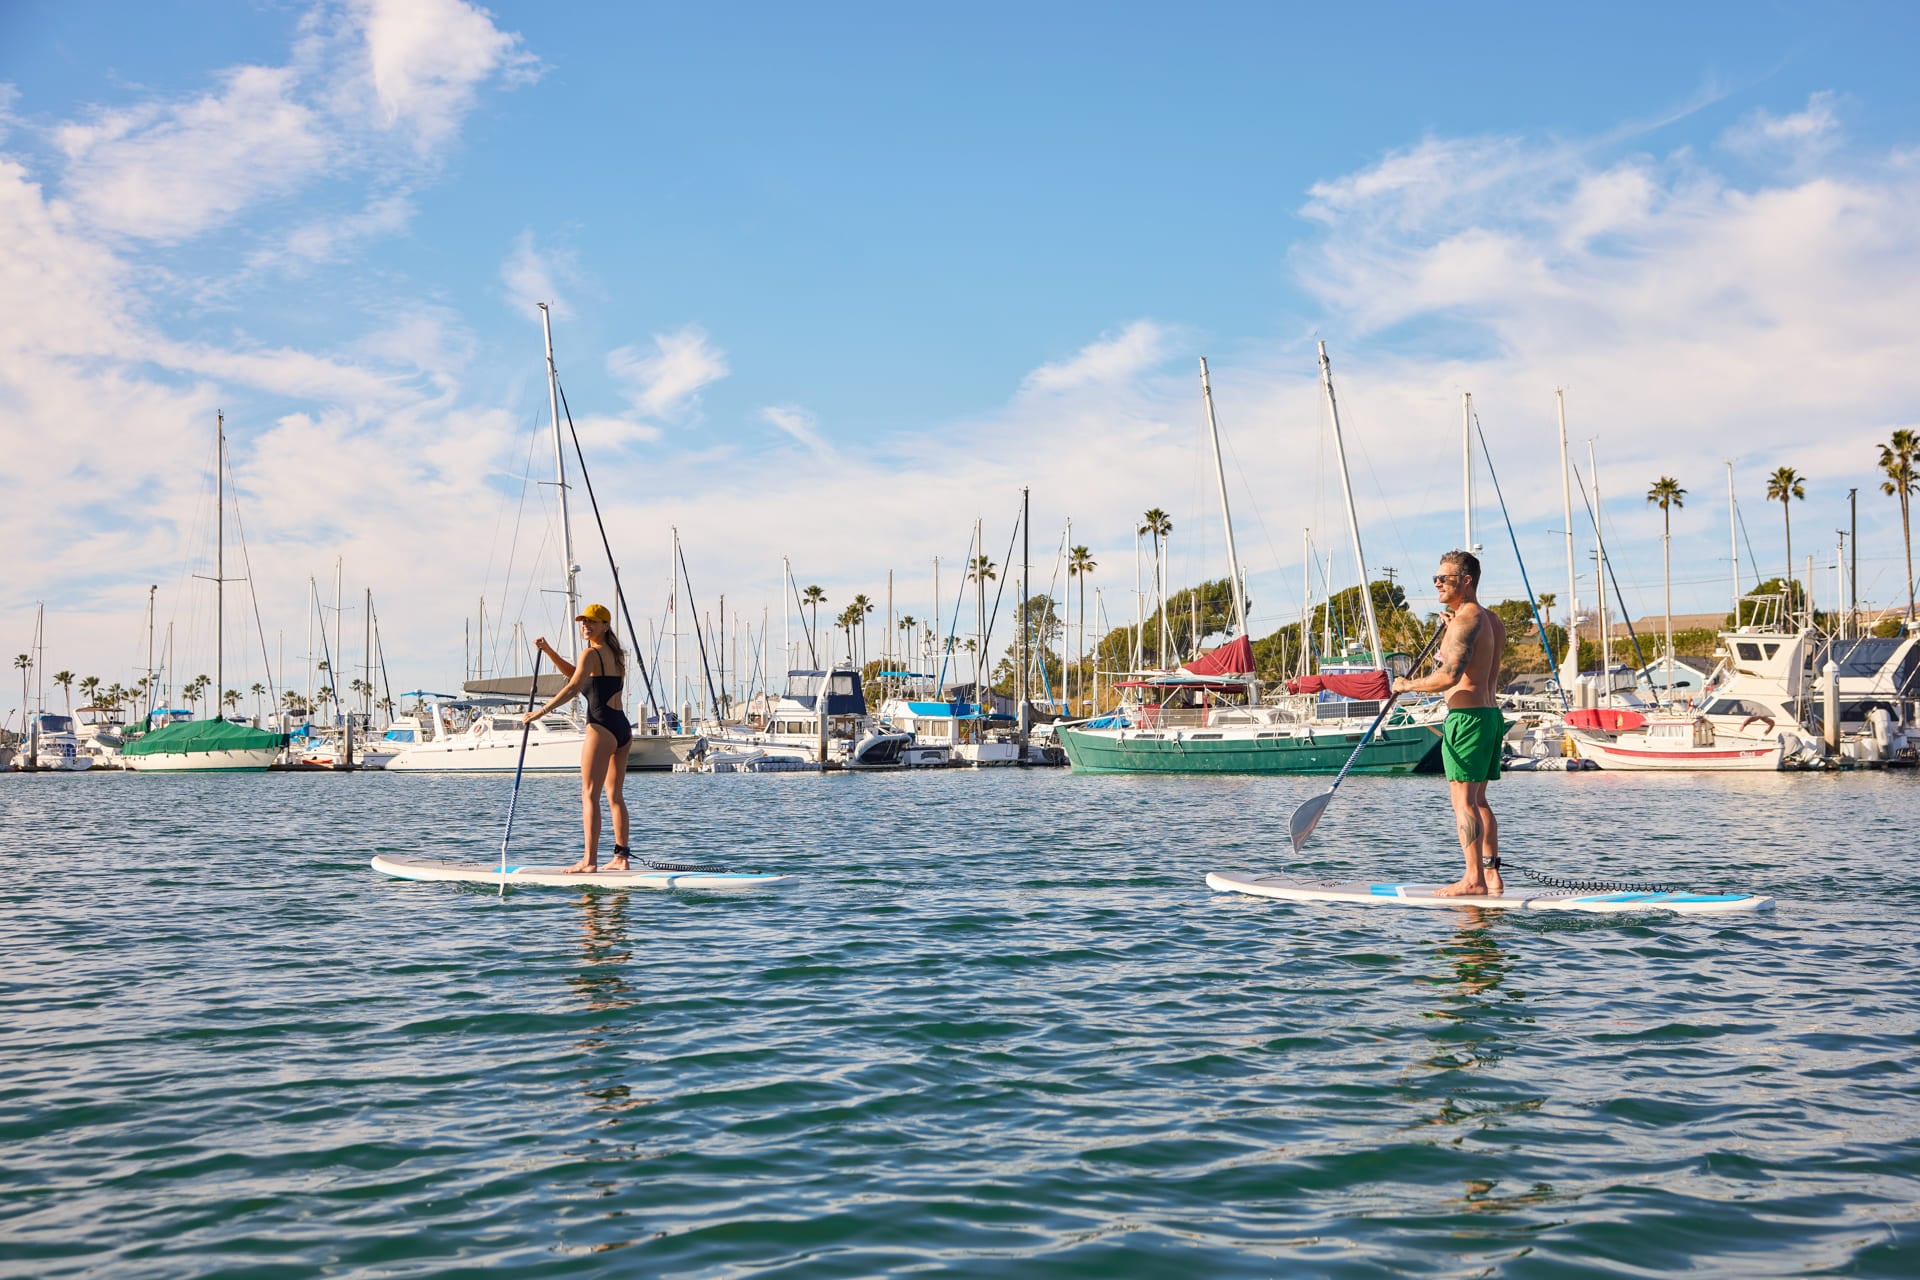 7 Refreshing Ways to Get Out on the Water